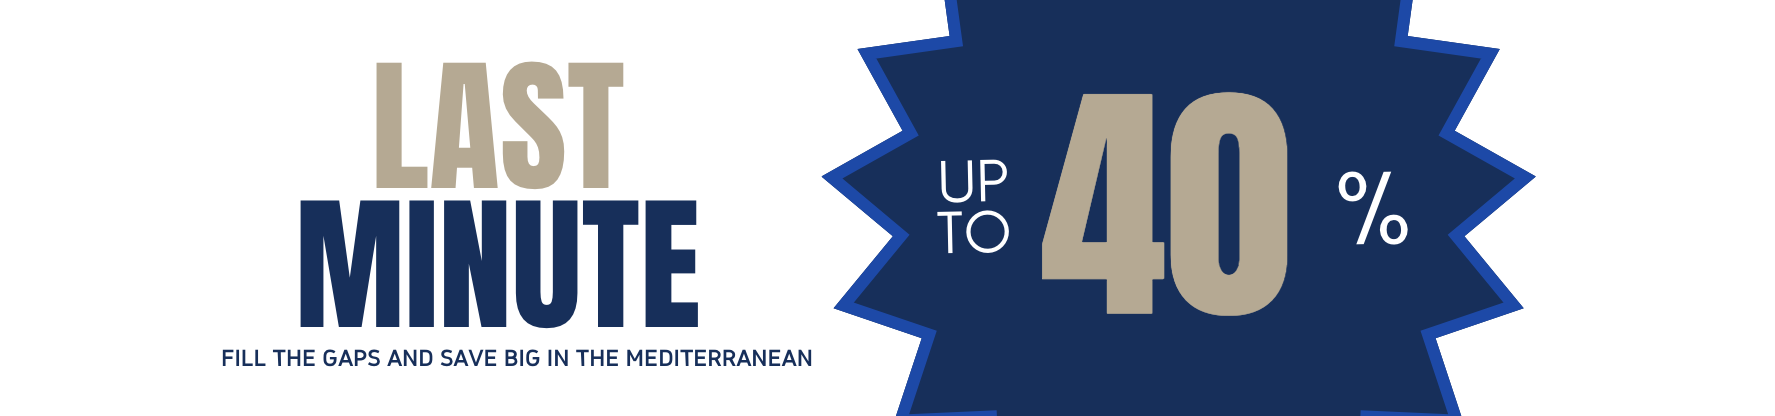 Last Minute Discounts up to 40% in the Mediterranean